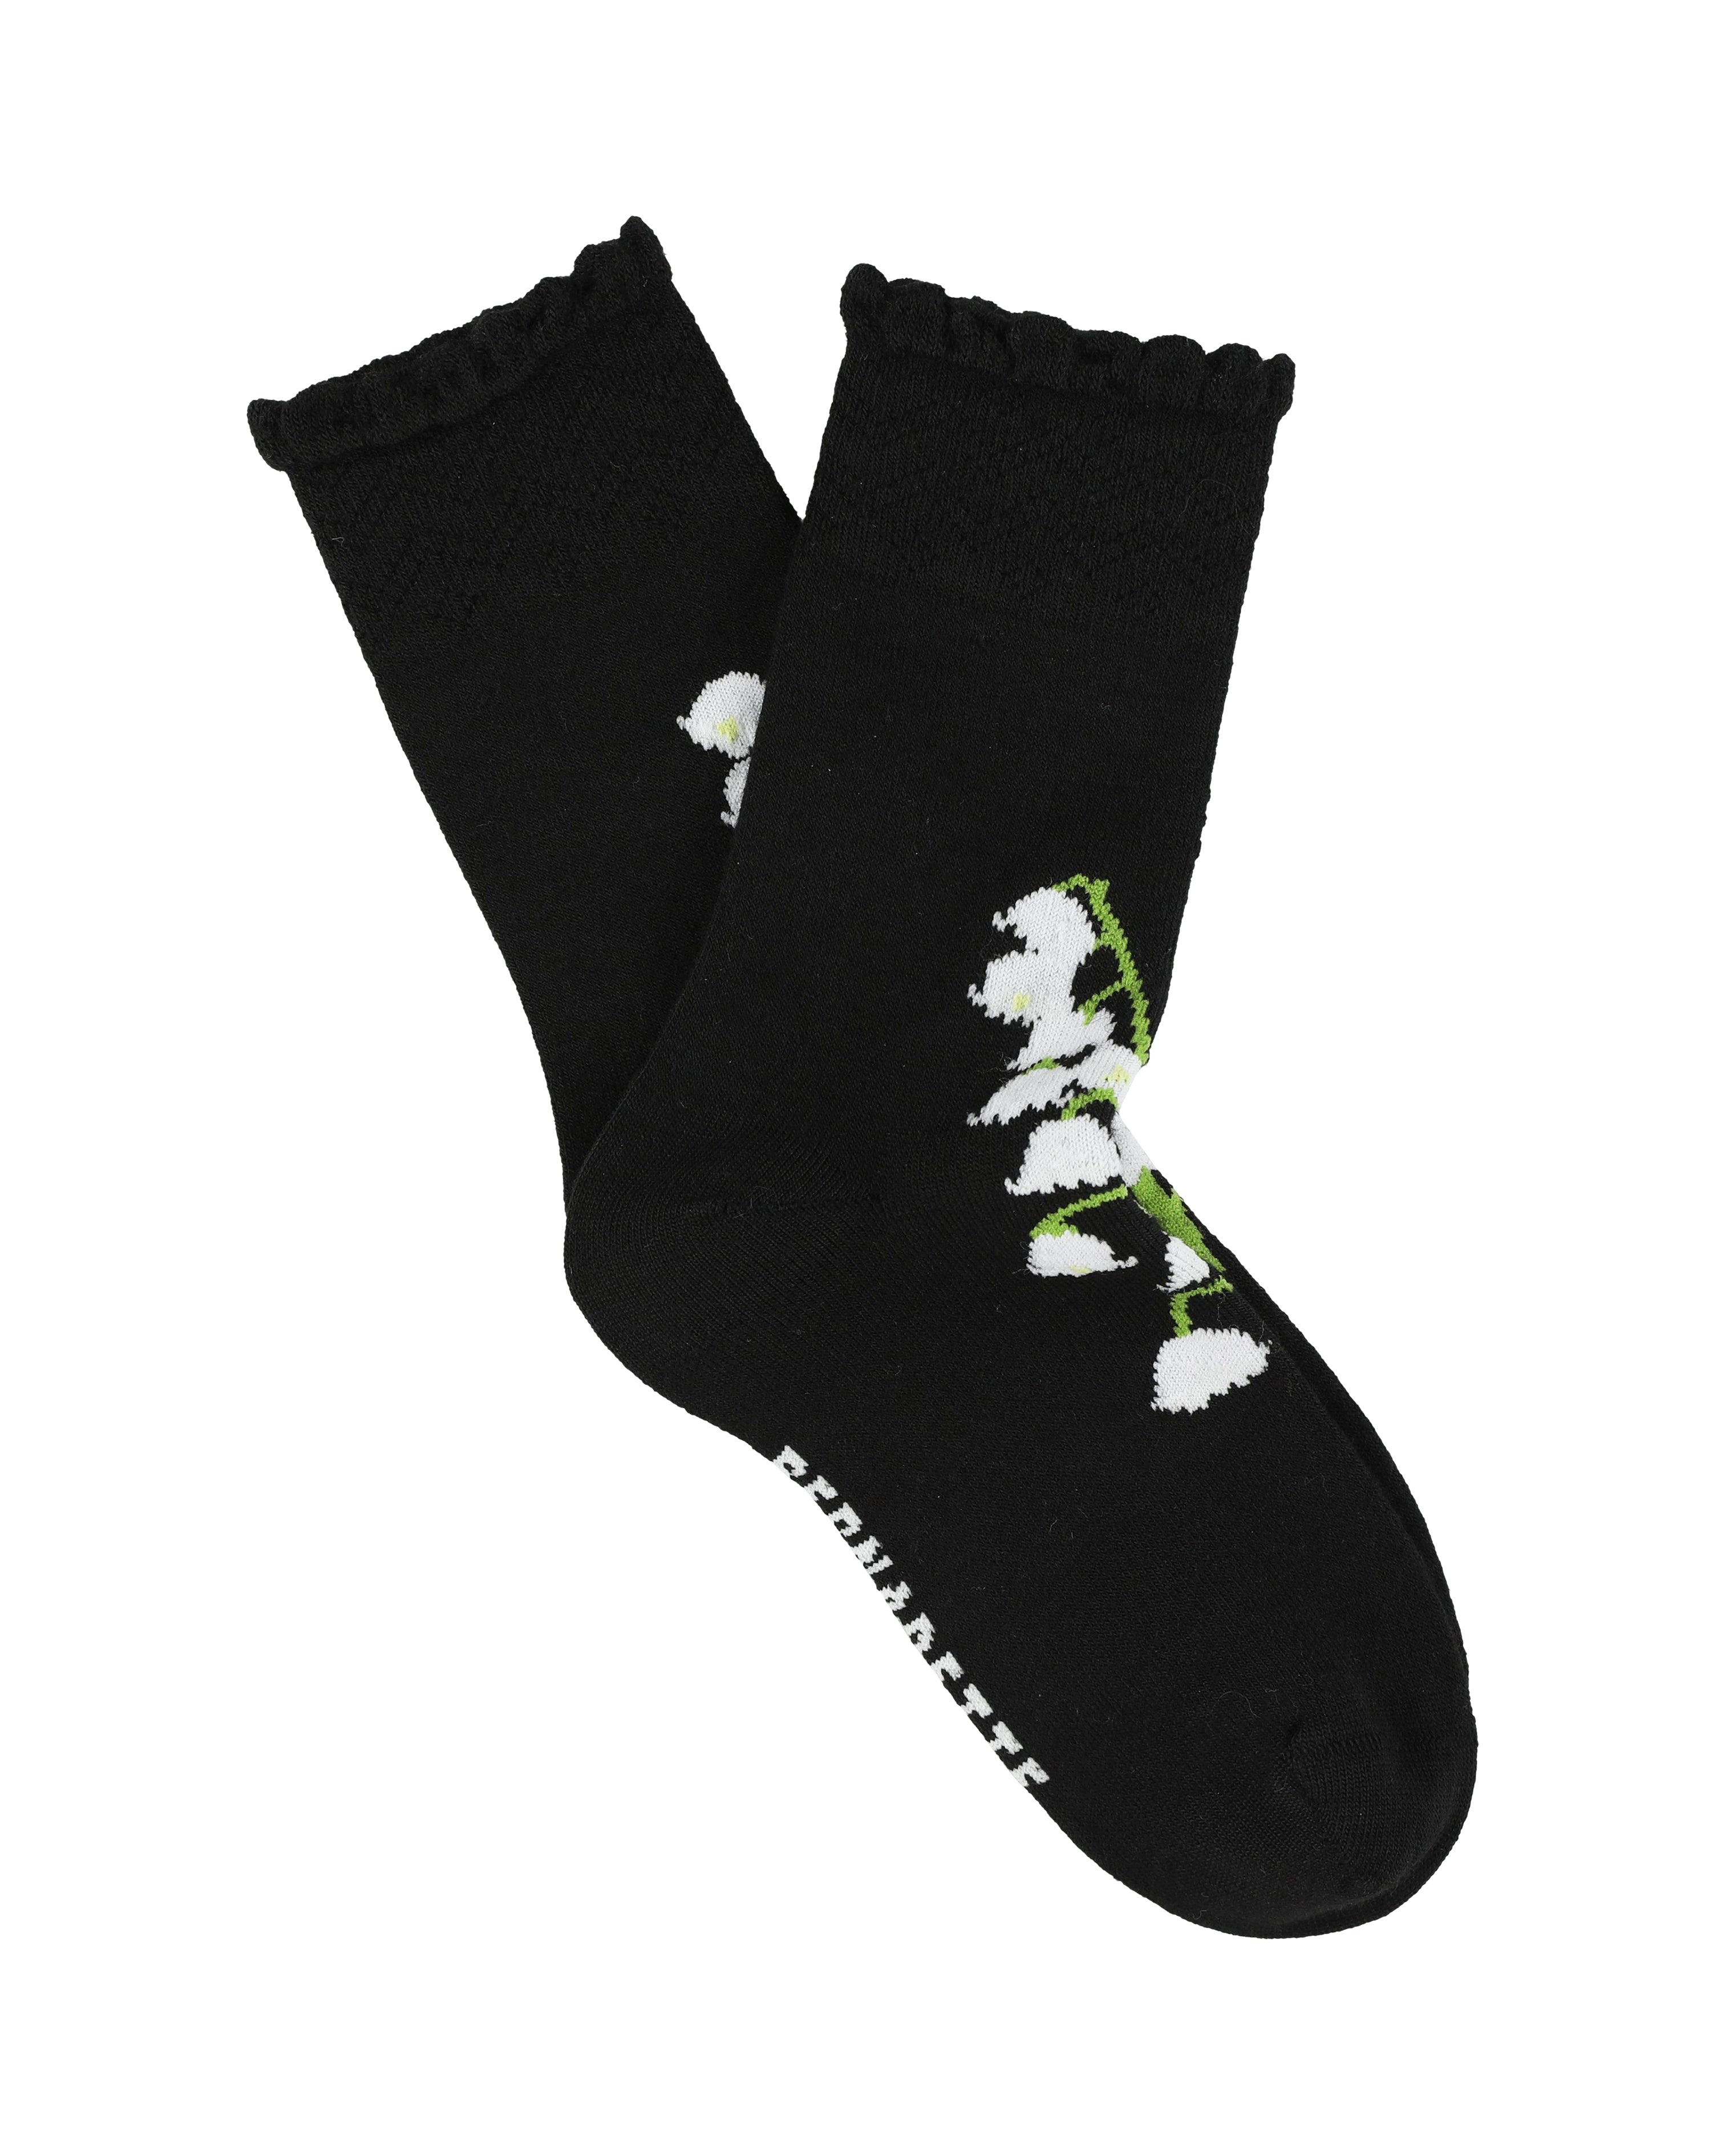 Socks Lily of the Valley - 3